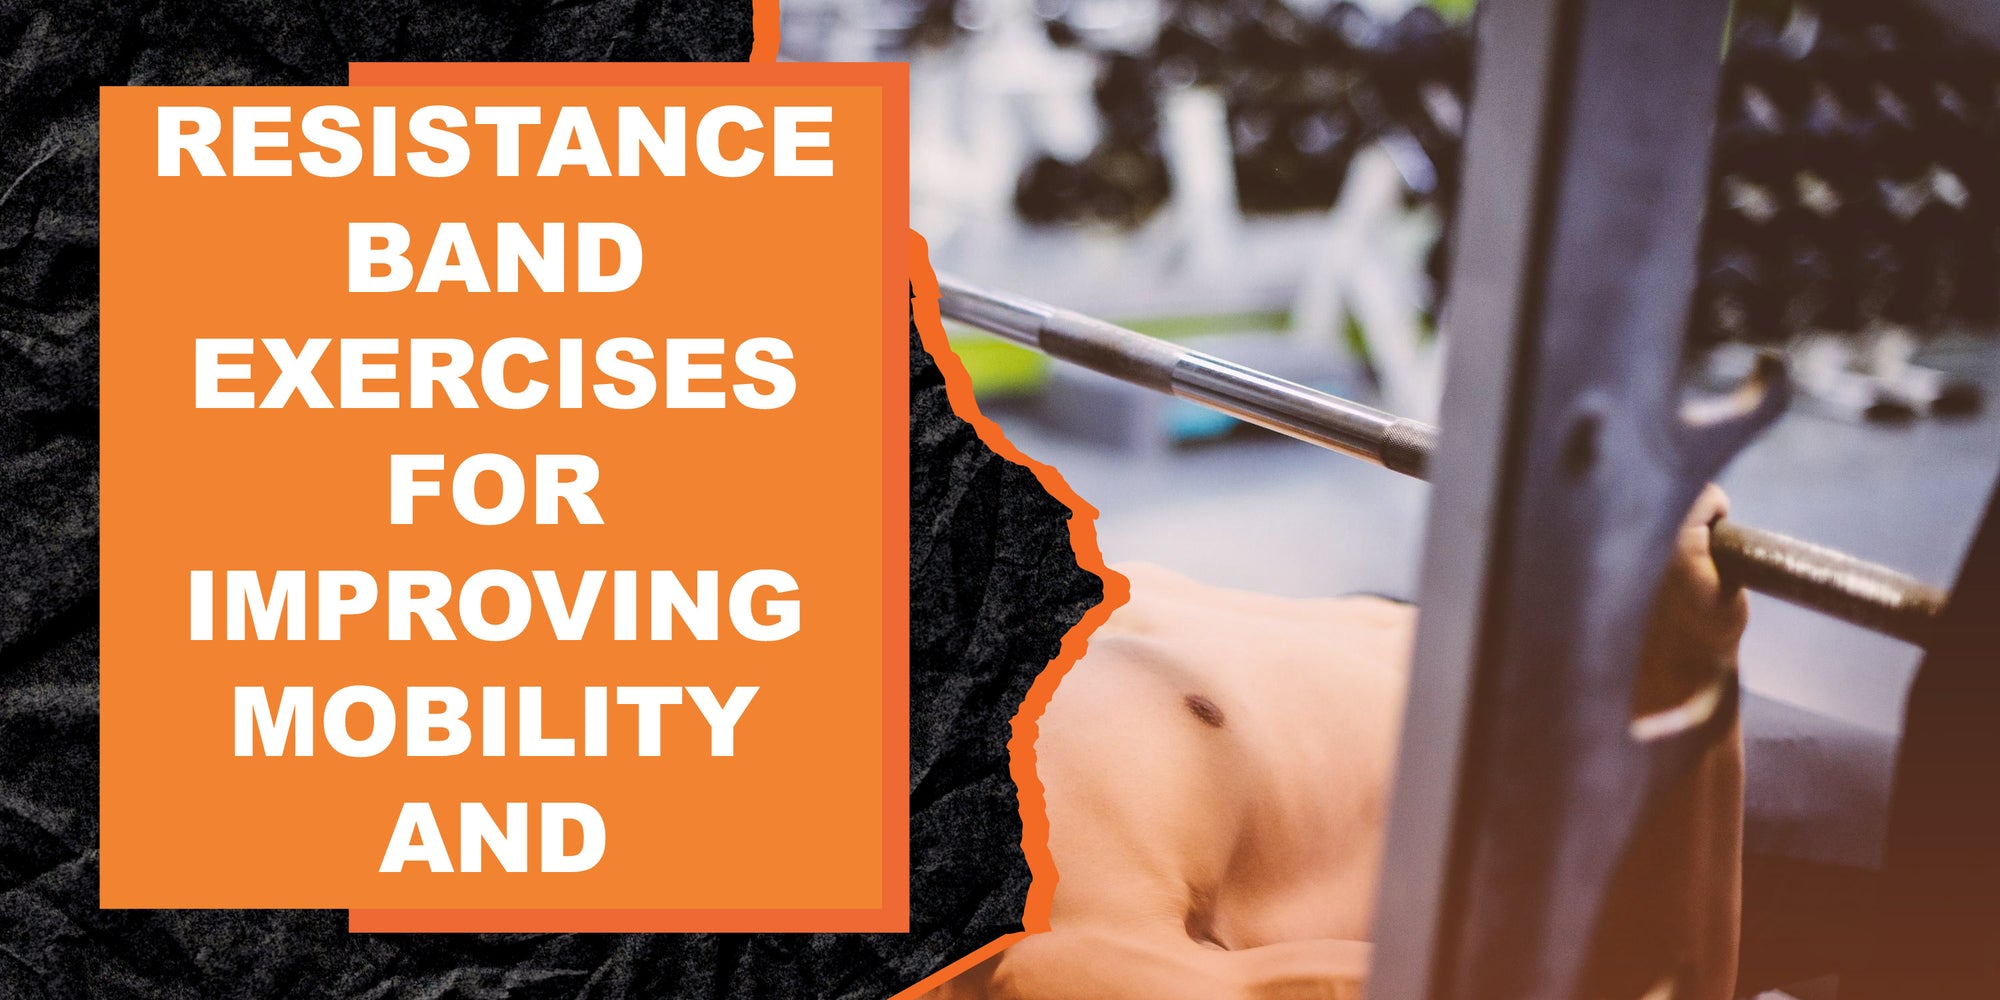 Resistance Band Exercises for Improving Mobility and Flexibility